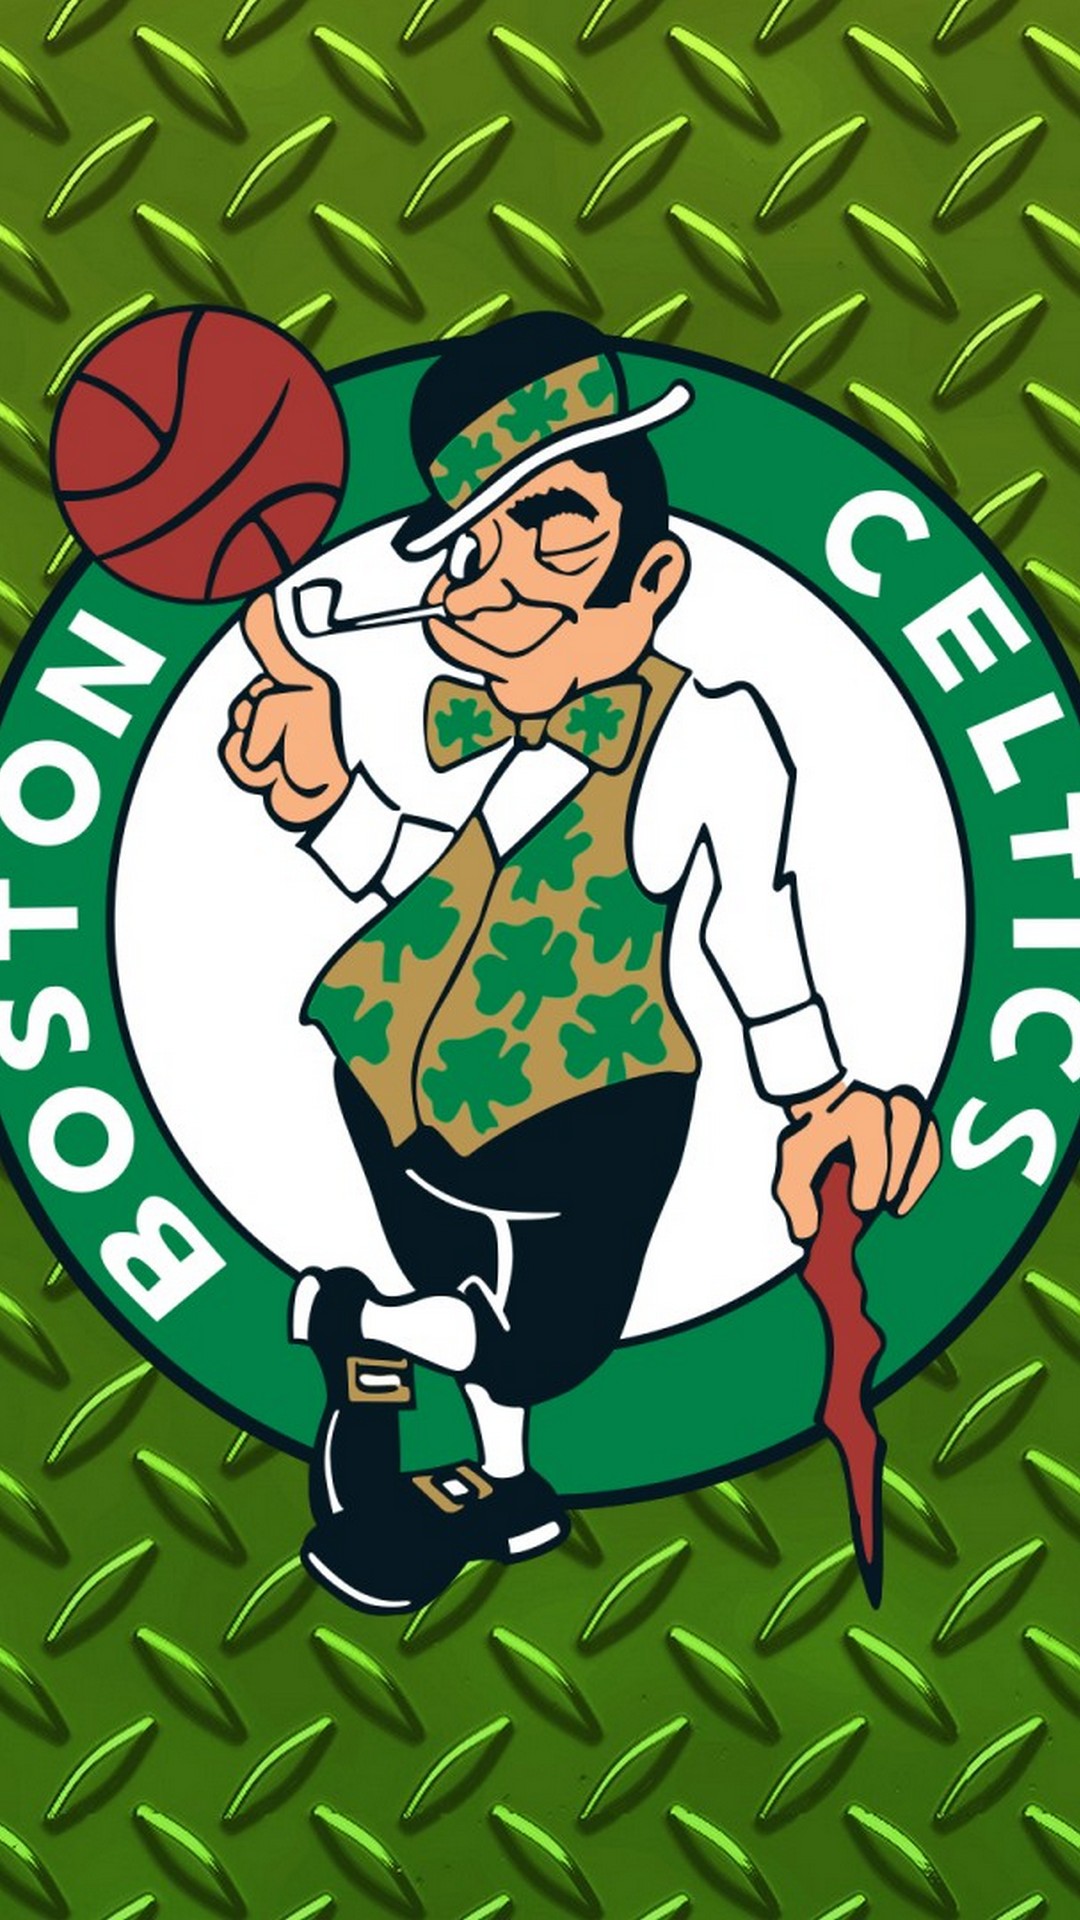 Boston Celtics Cellphone Wallpaper with image resolution 1080x1920 pixel. You can make this wallpaper for your Desktop Computer Backgrounds, Mac Wallpapers, Android Lock screen or iPhone Screensavers